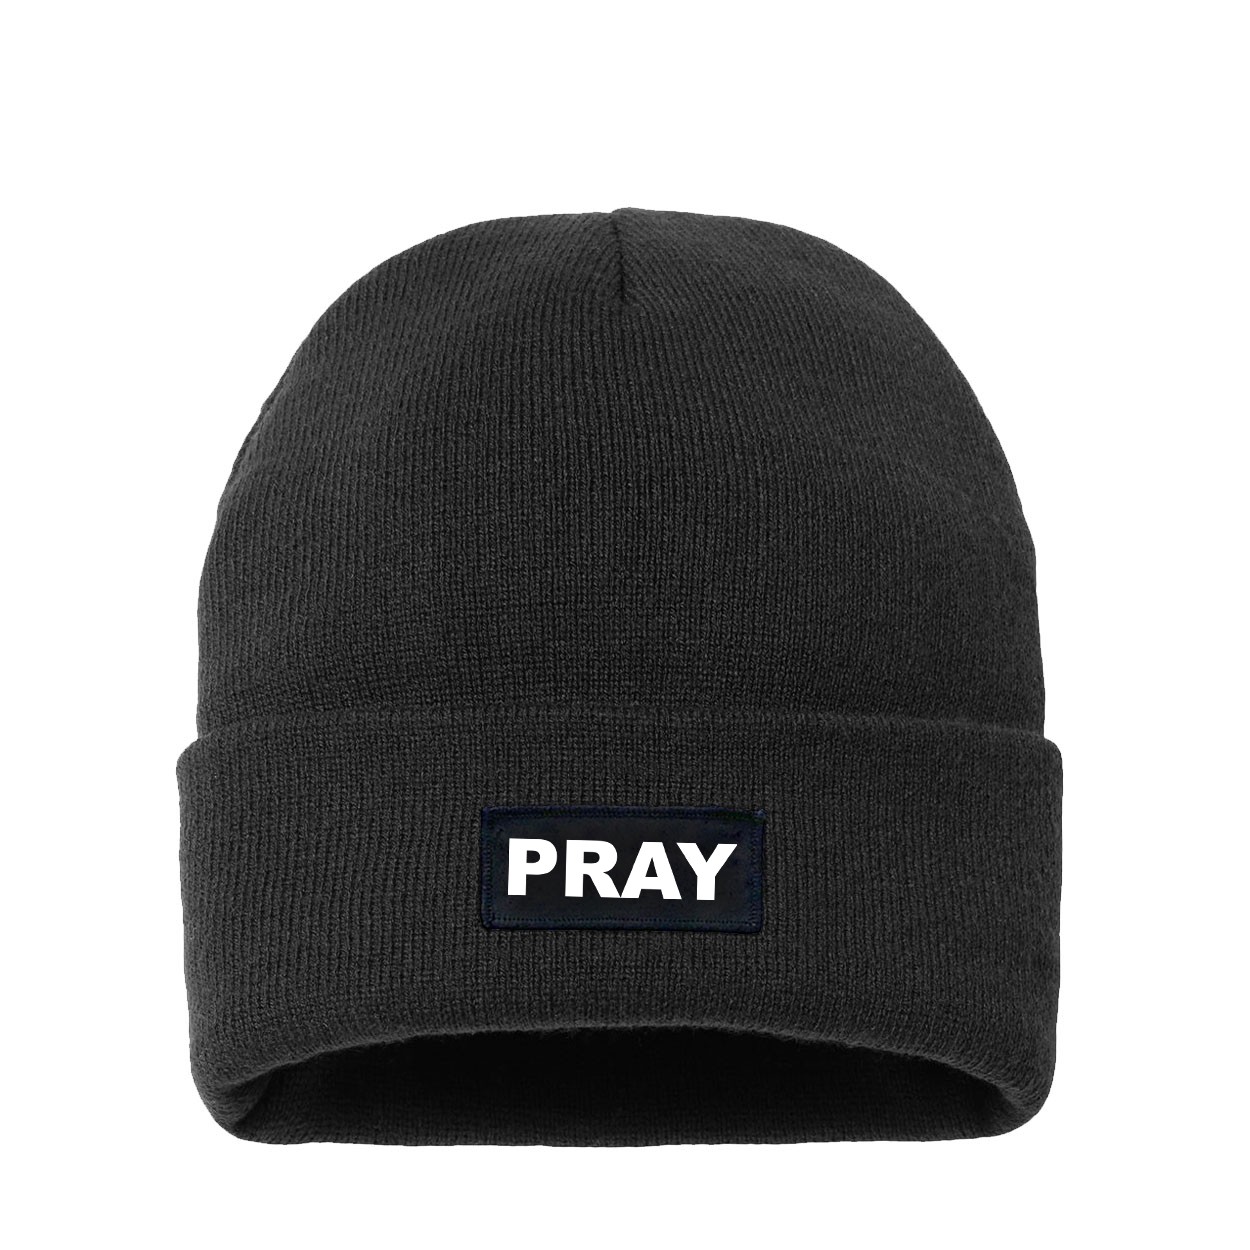 Pray Brand Logo Night Out Woven Patch Night Out Sherpa Lined Cuffed Beanie Black